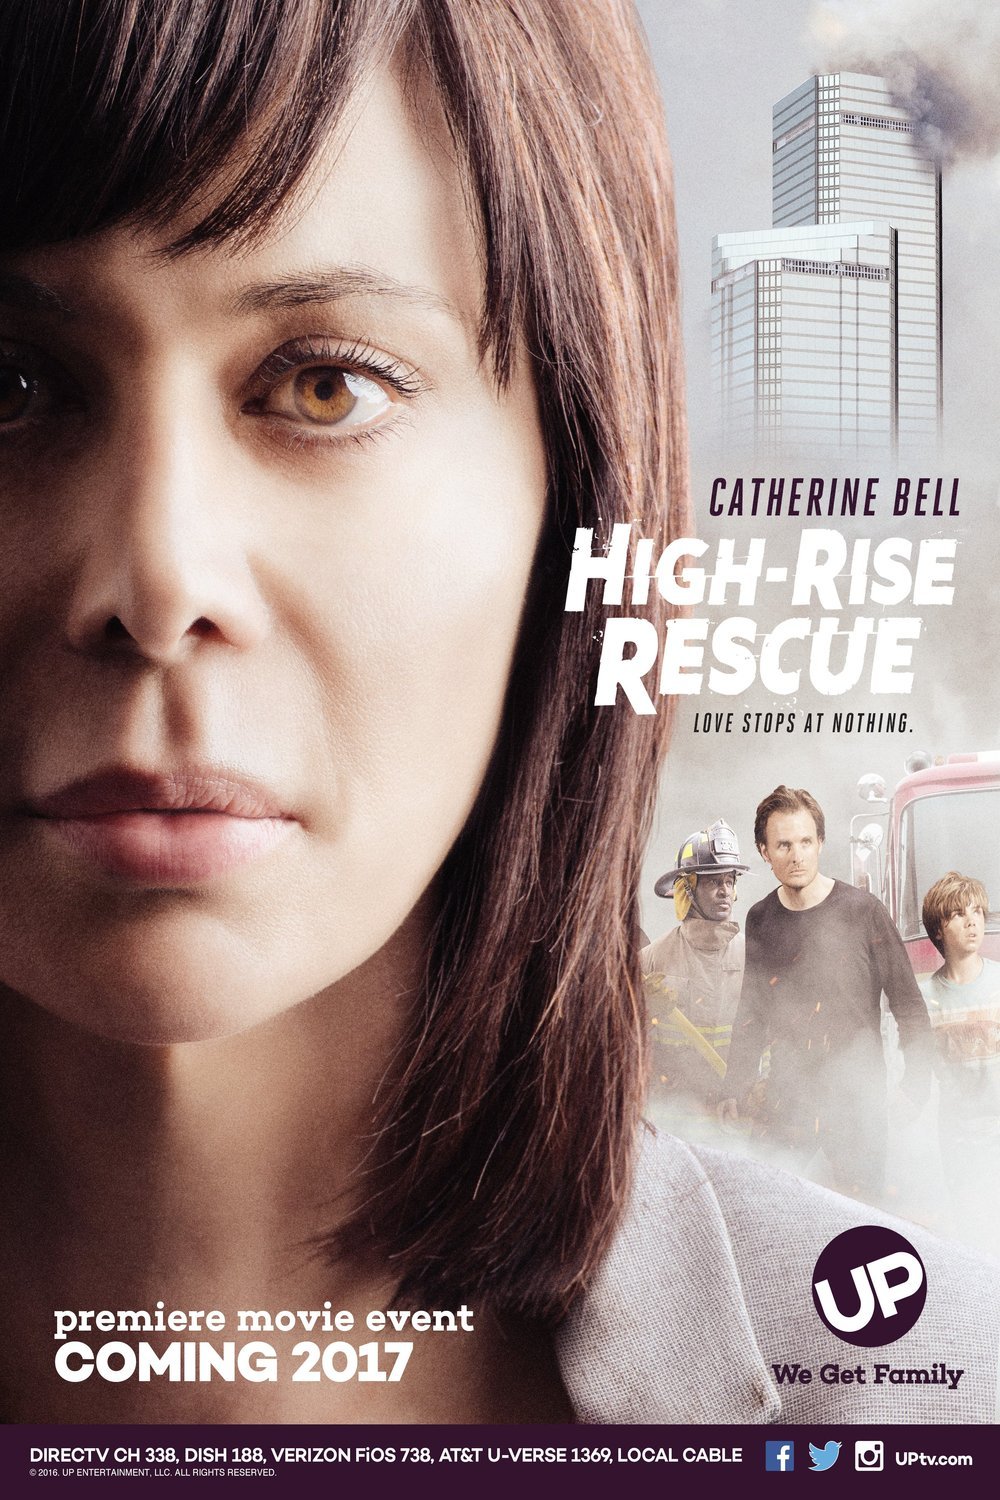 Poster of the movie High-Rise Rescue